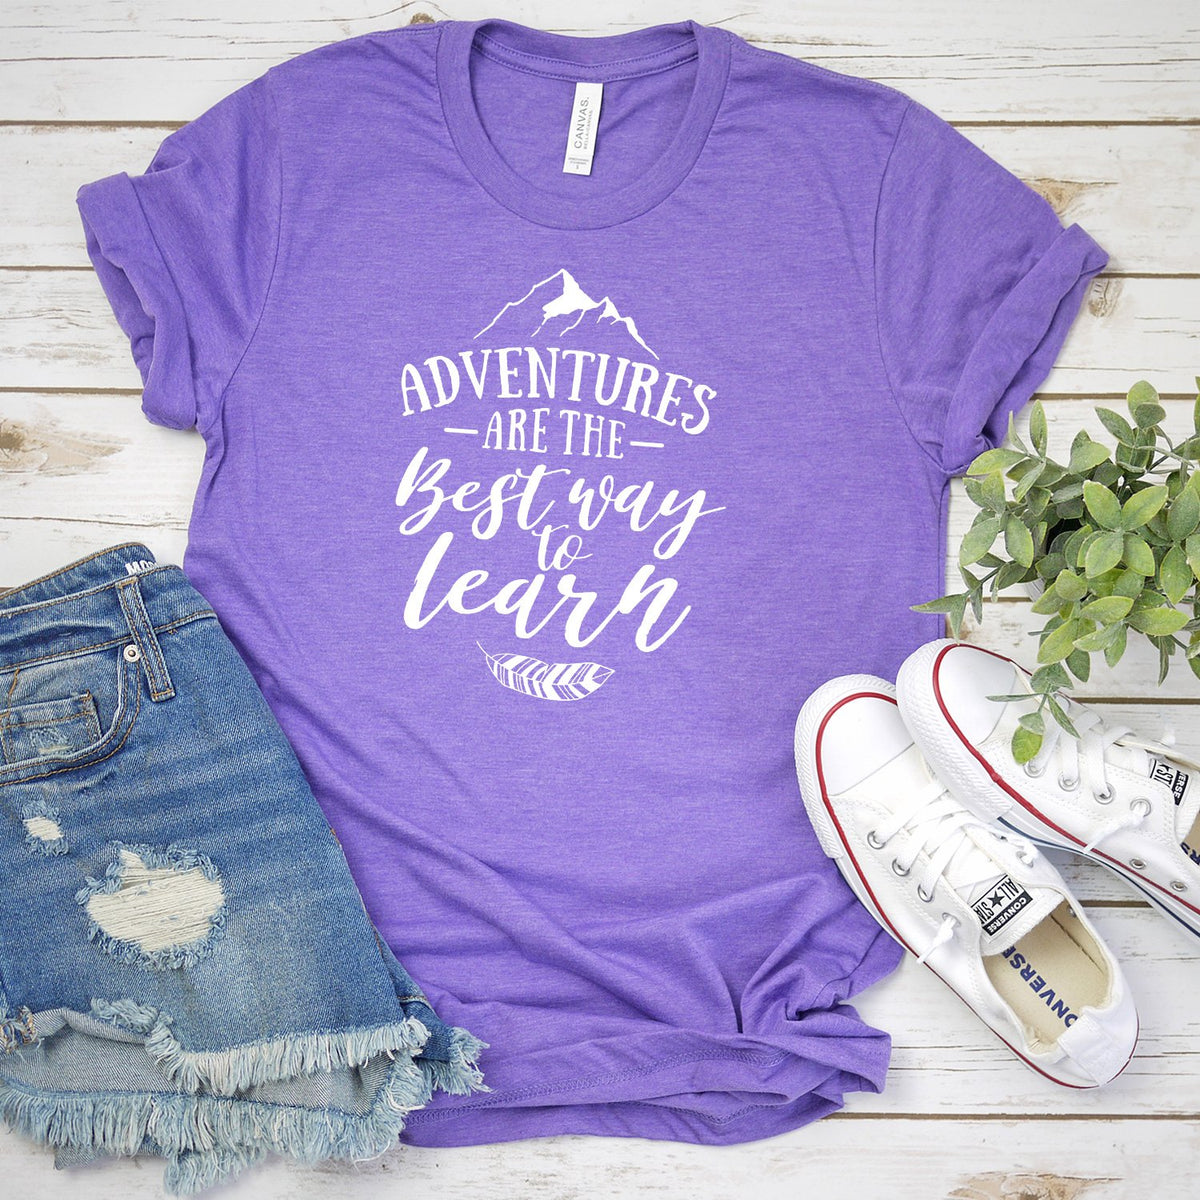 Adventures Are The Best Way to Learn - Short Sleeve Tee Shirt